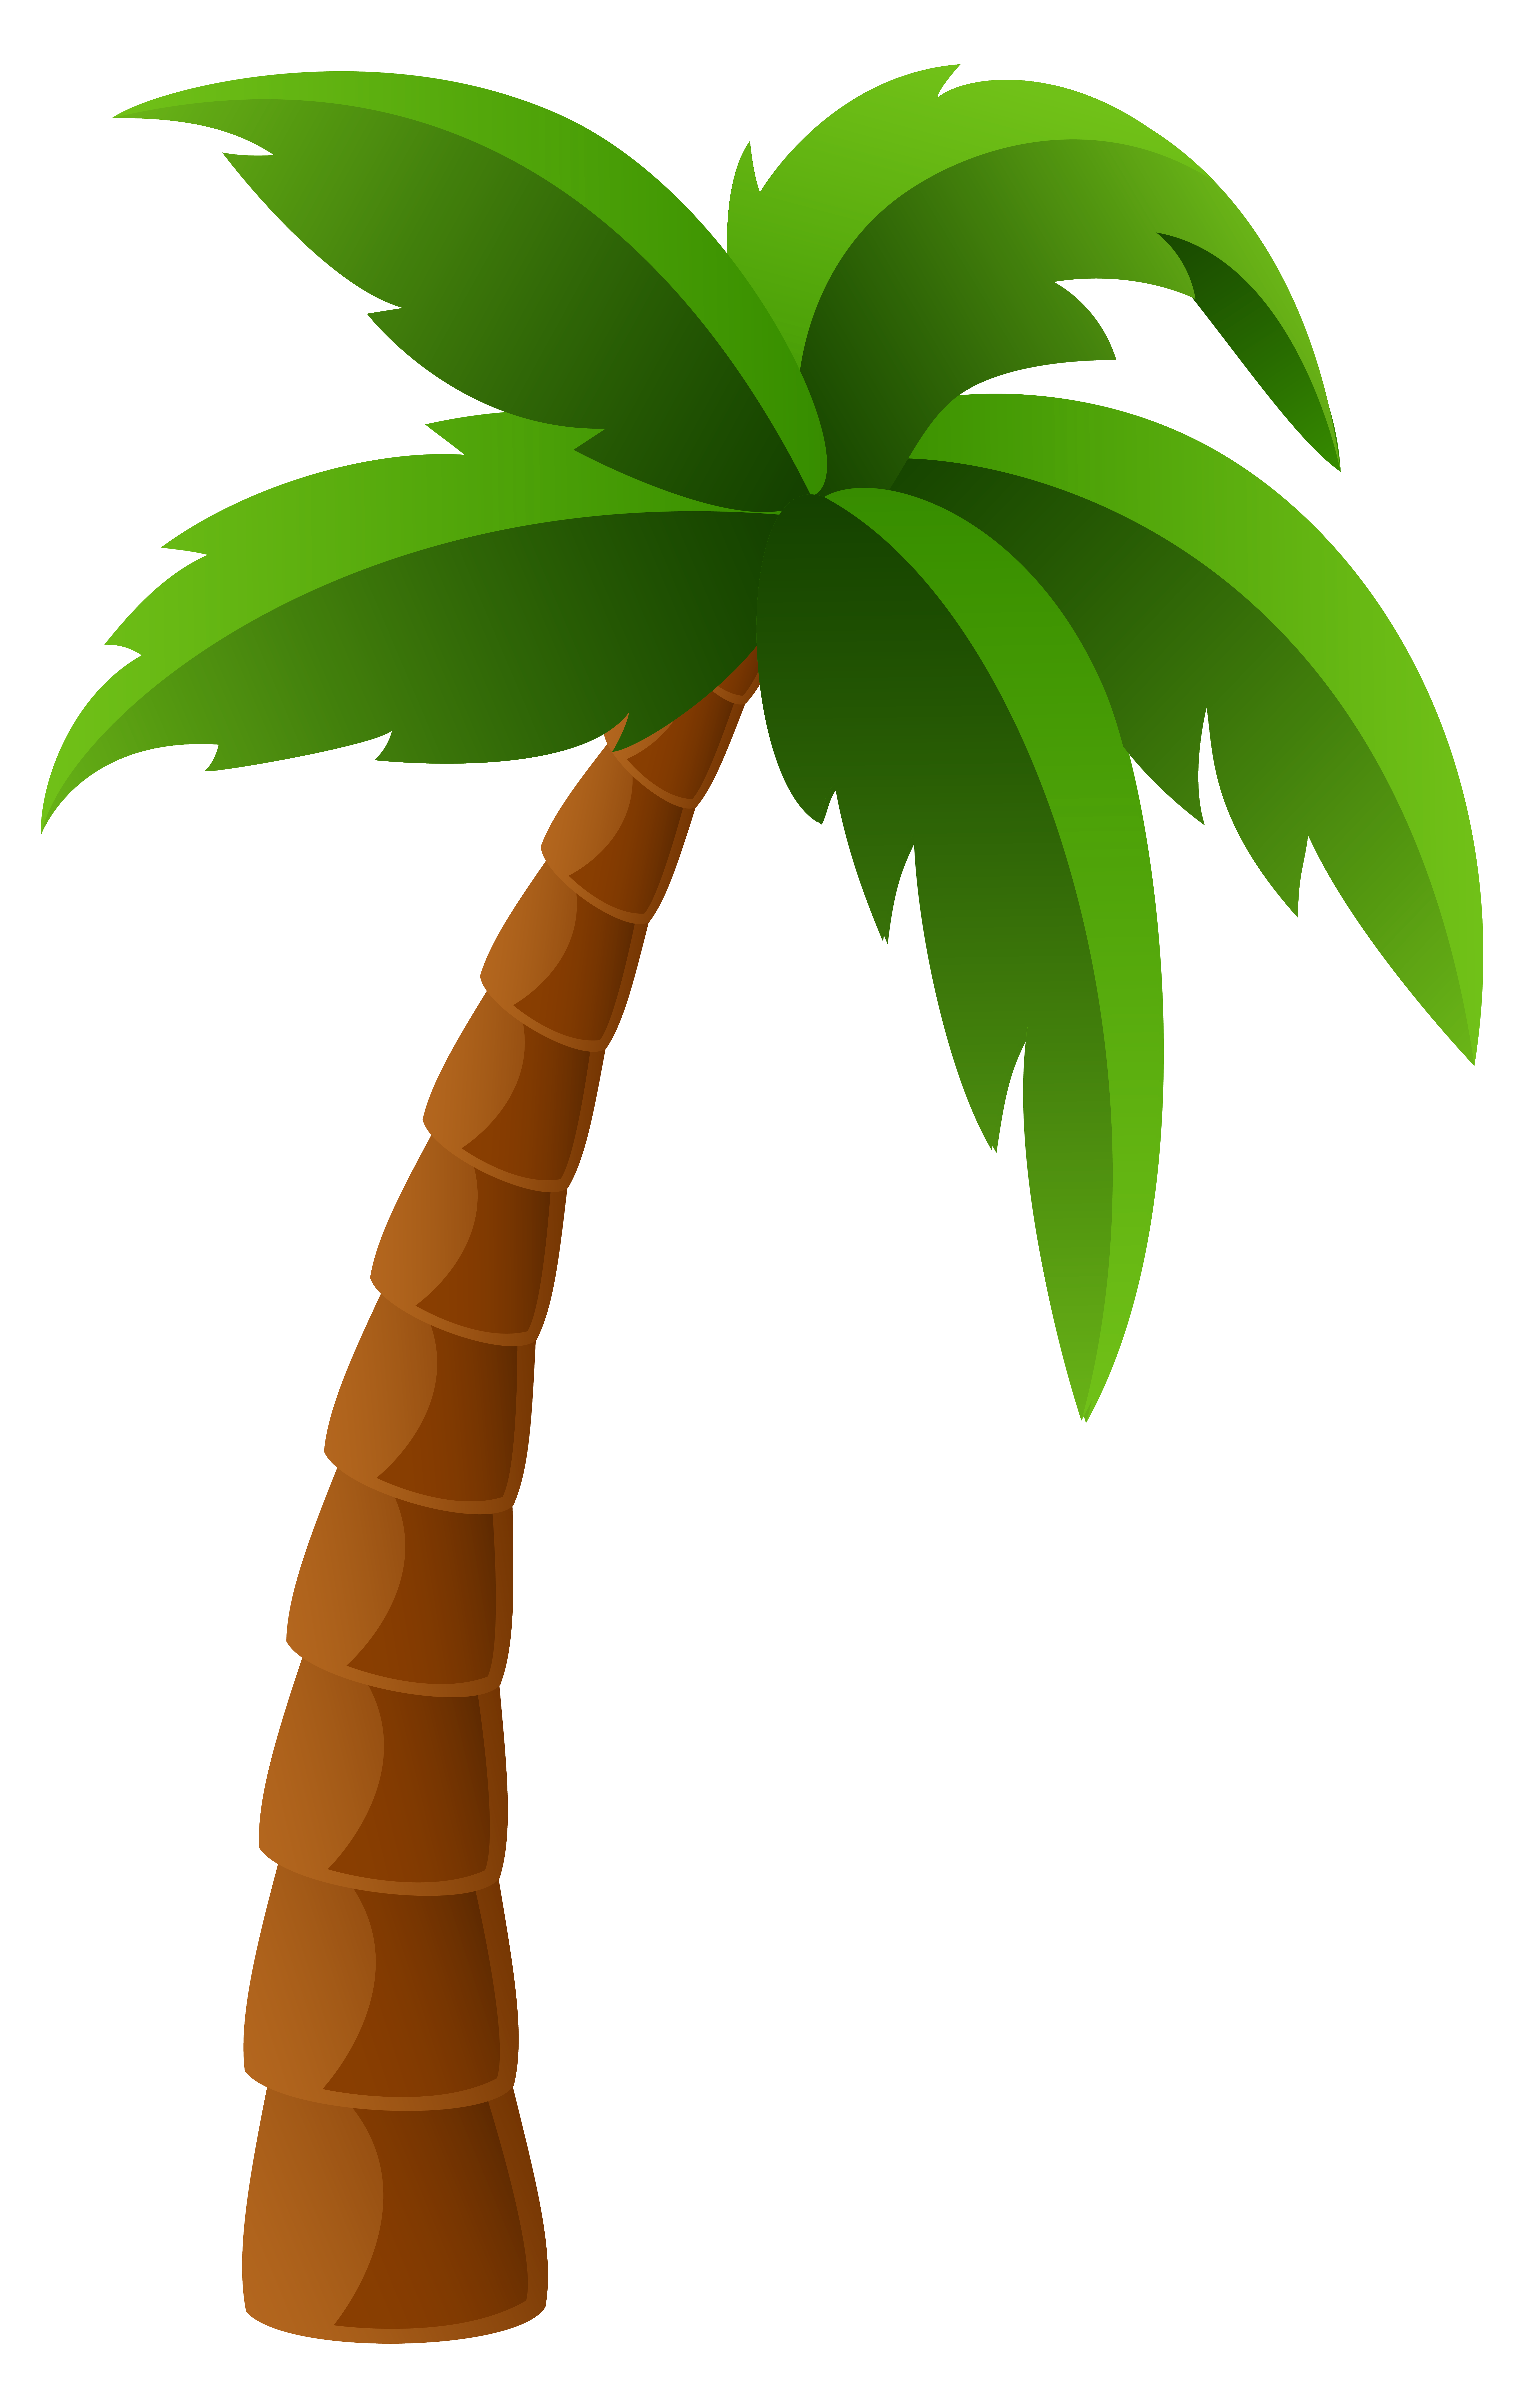 Clipart of a palm tree - ClipartFest